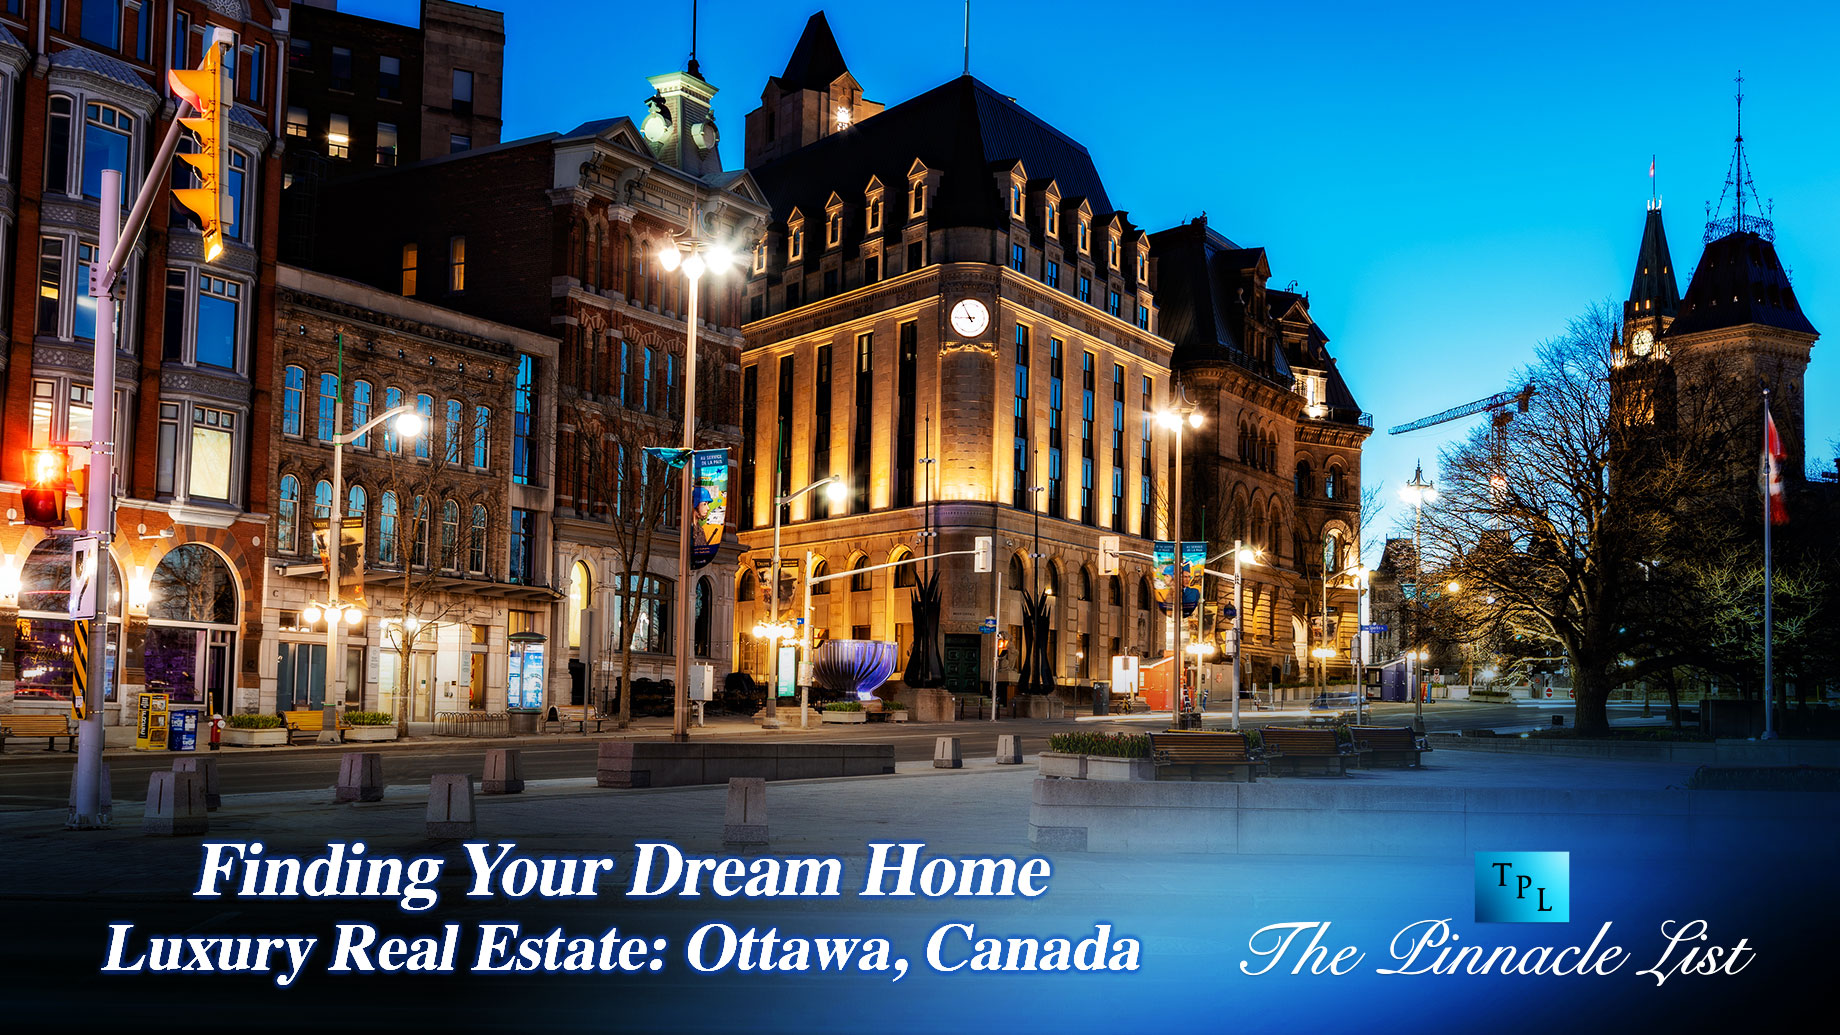 Finding Your Dream Home: Luxury Real Estate In Ottawa, Canada